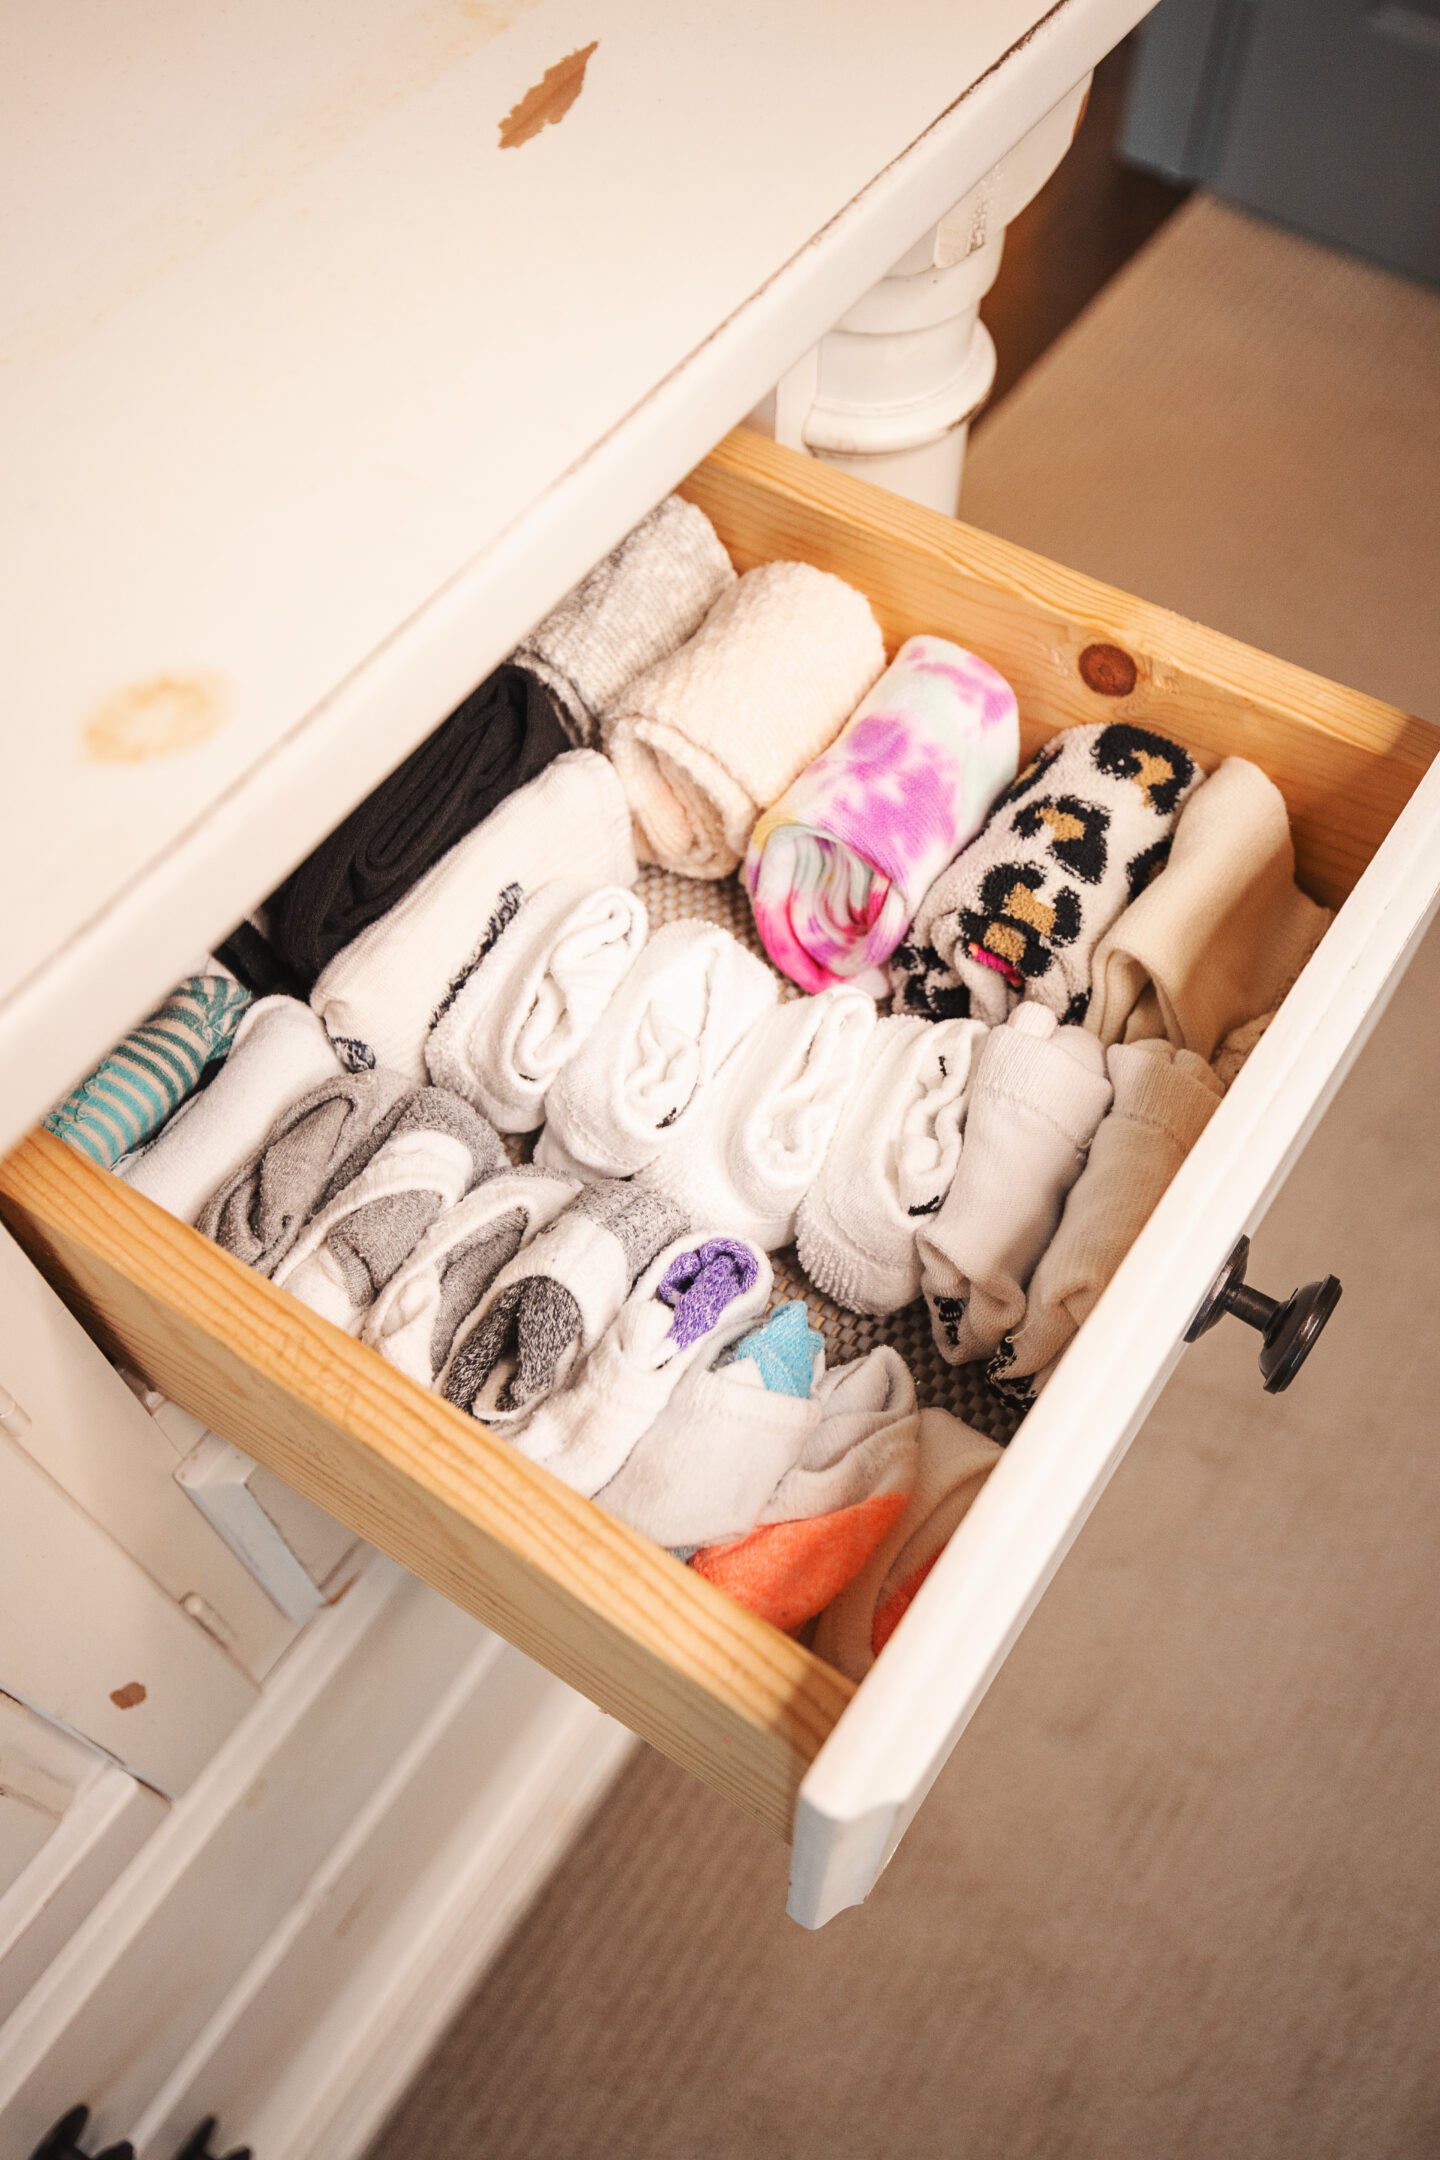 organizing, decluttering, organization, tips for organizing, closet organization, small space hacks, small space tips, organization products, apartment living, apartment hacks, closet organization ideas, closet designs, closet organization ideas small, storage solutions, small spaces